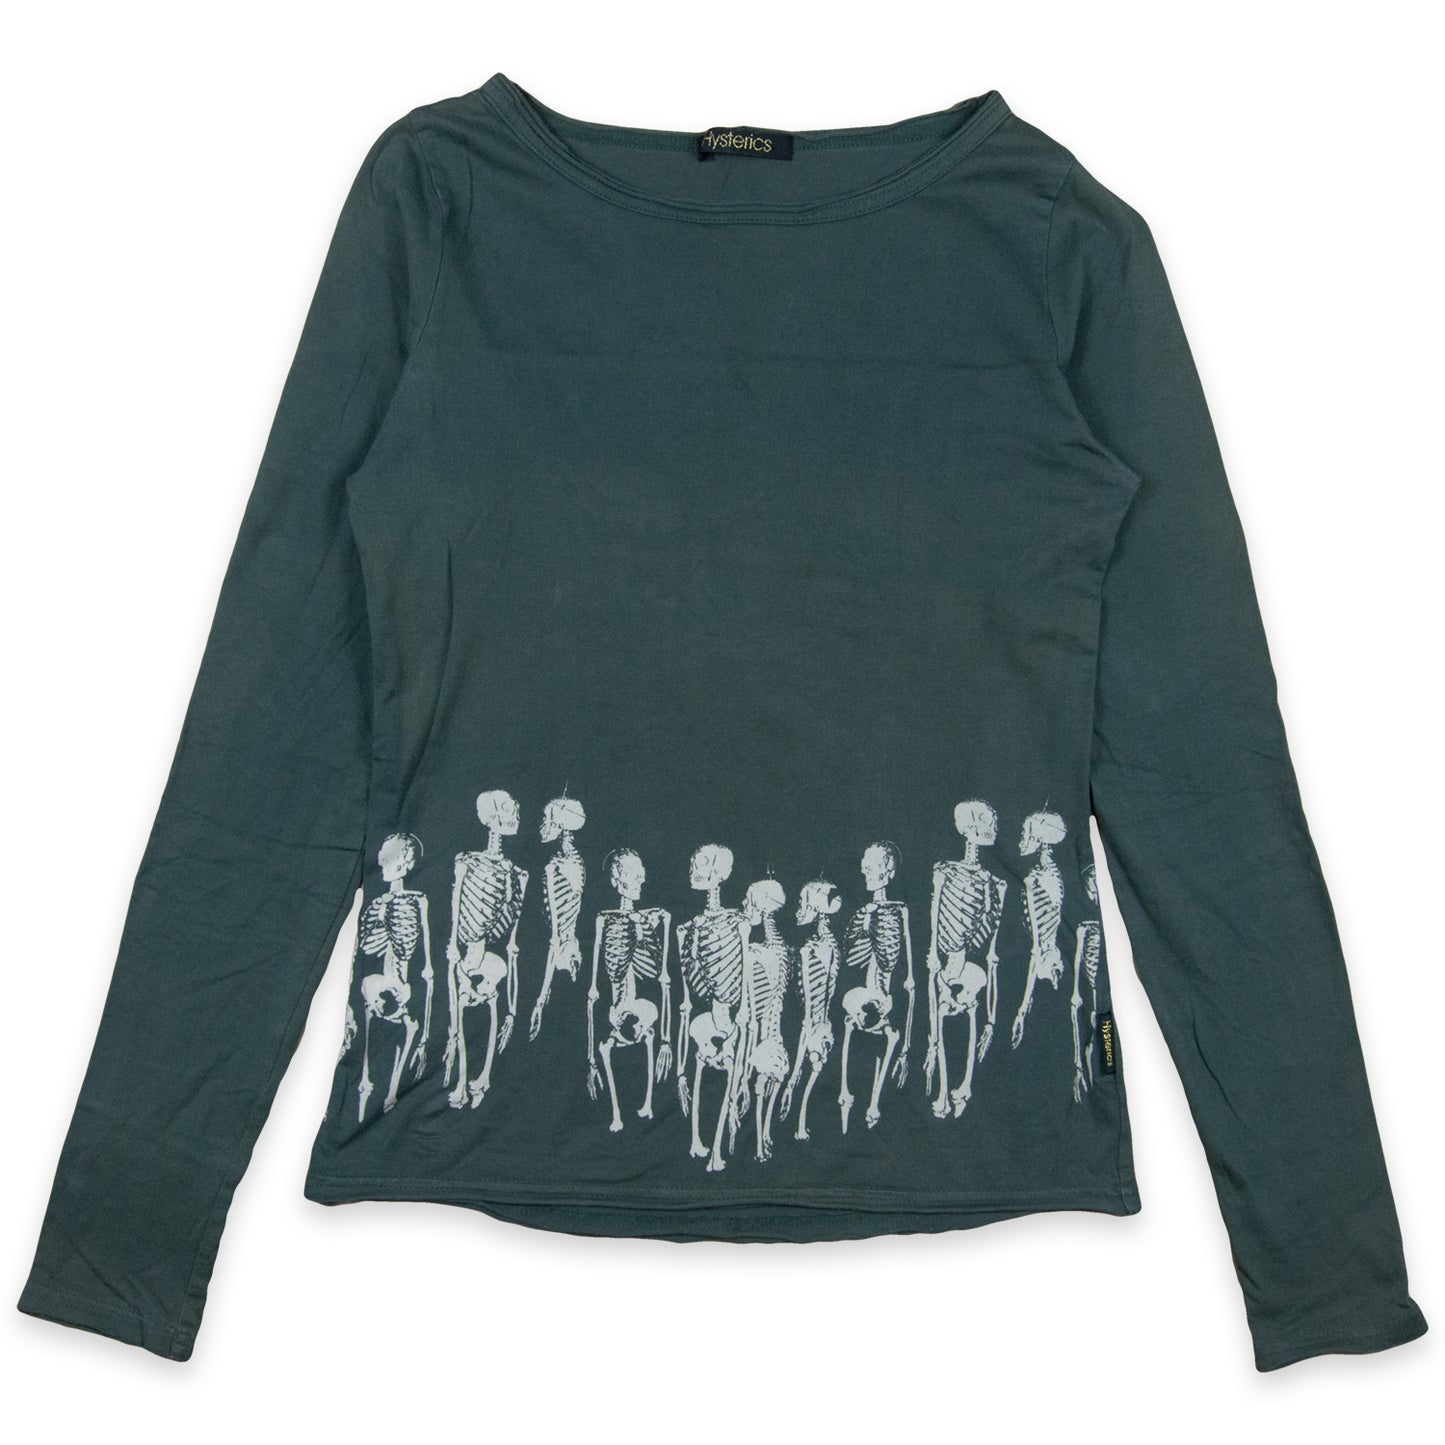 Hysteric Glamour Skeleton Lace Up Long Sleeve Tee